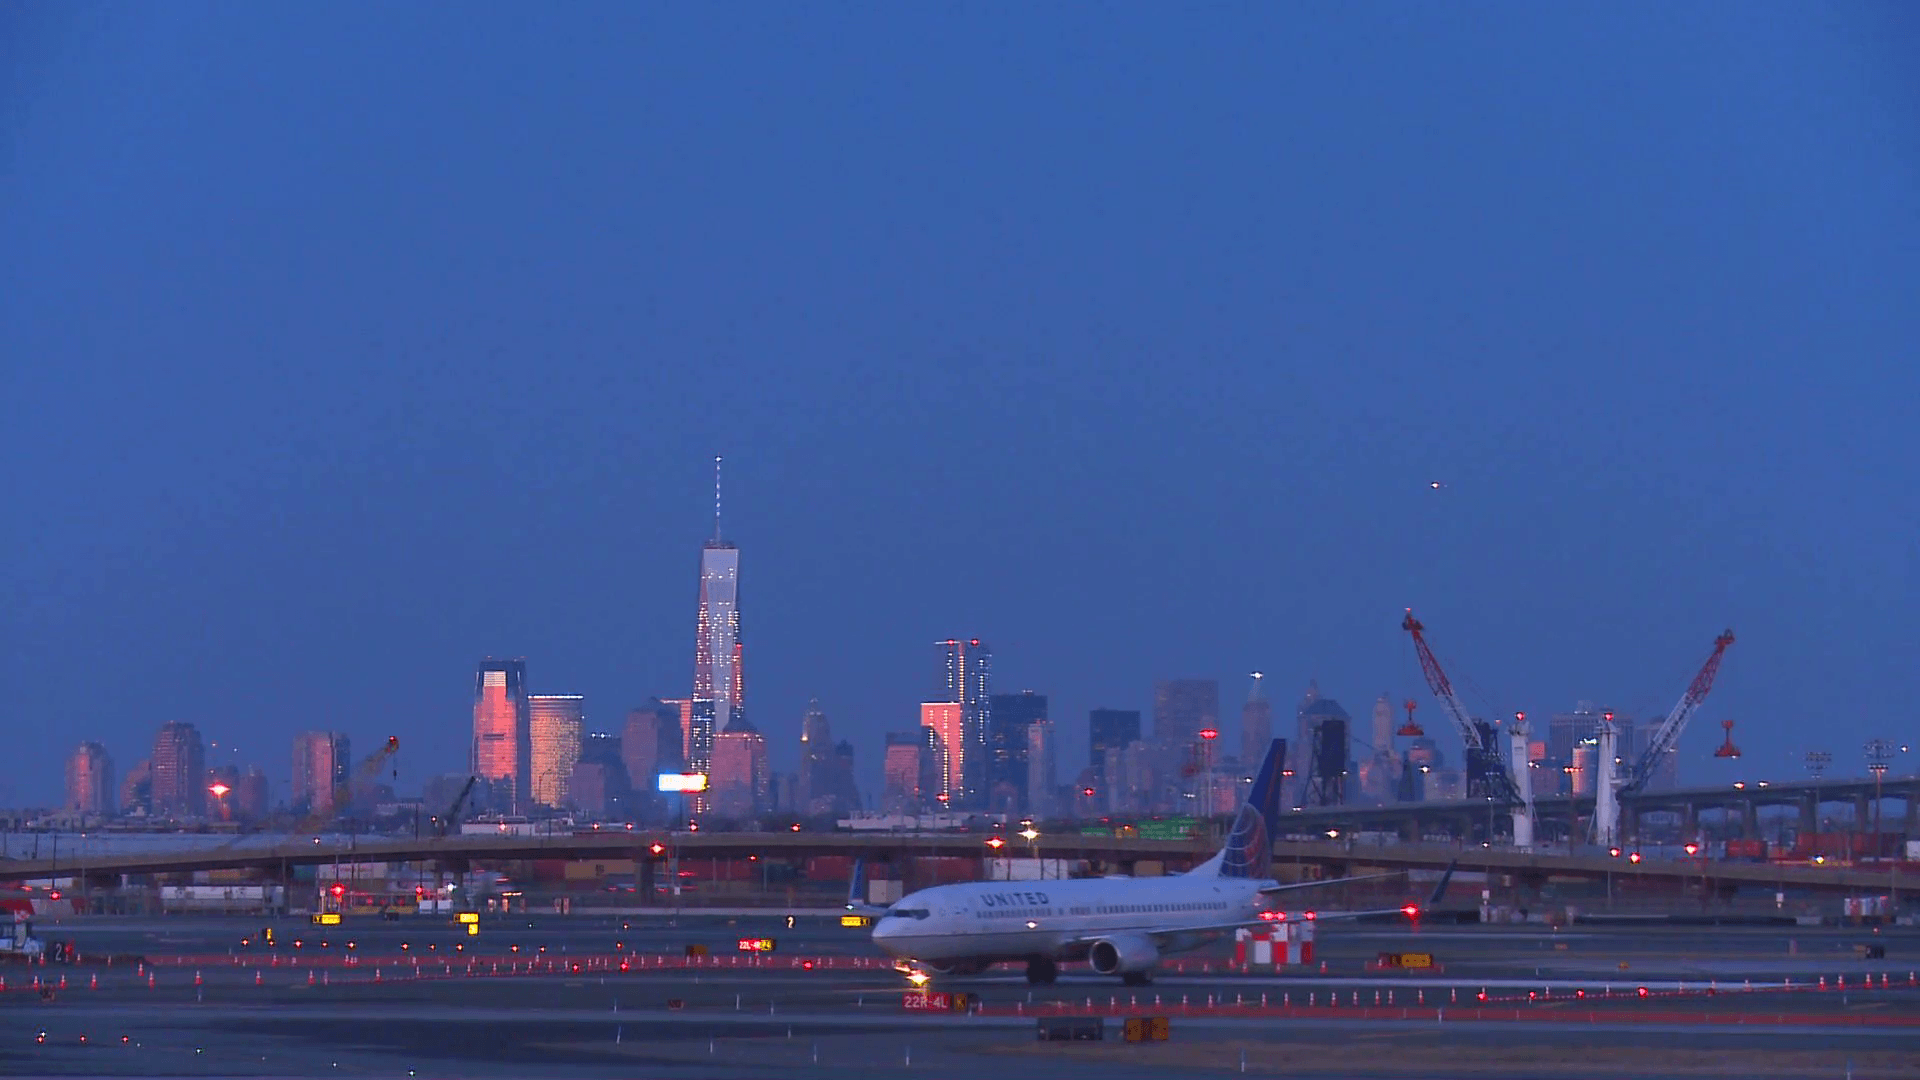 Planes taxi at Newark airport at dusk with the Manhattan skyline